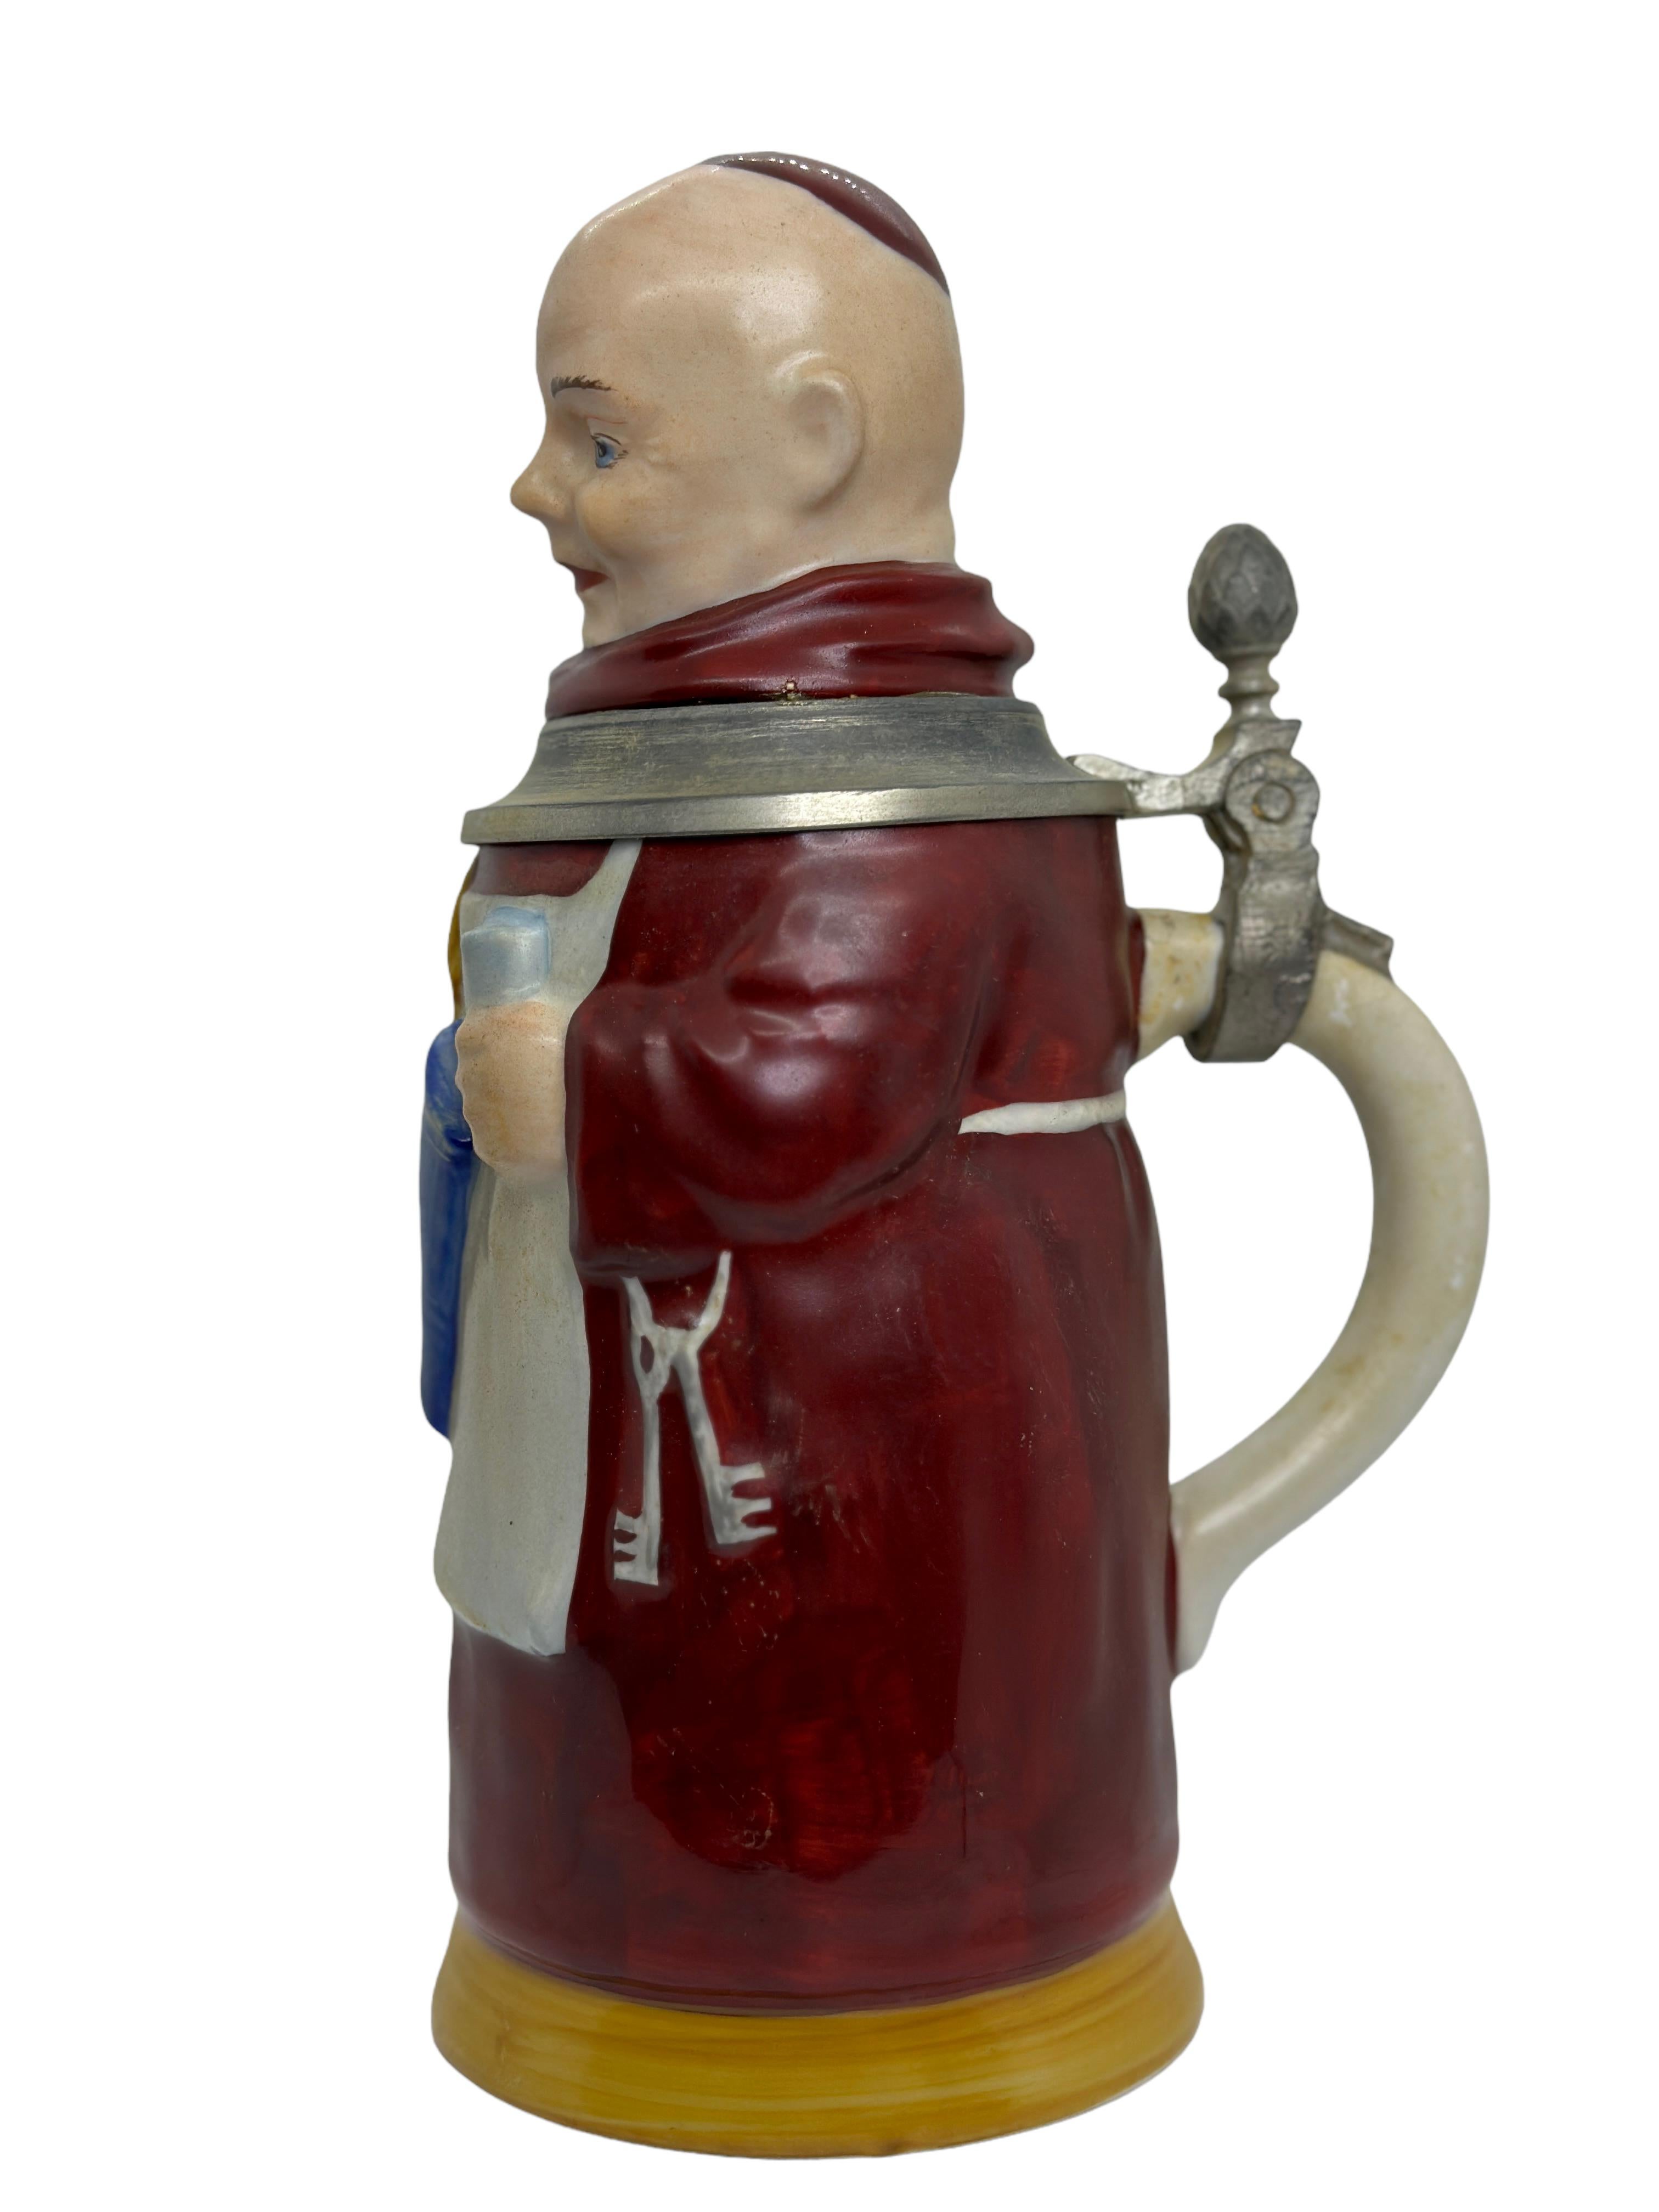 A gorgeous character beer stein - Monk. This character beer stein has been made in Germany circa 1930s or older, attributed to E. Bohne, Thuringia Germany. Absolutely gorgeous piece hand painted and still in great condition. Lid works properly. Nice